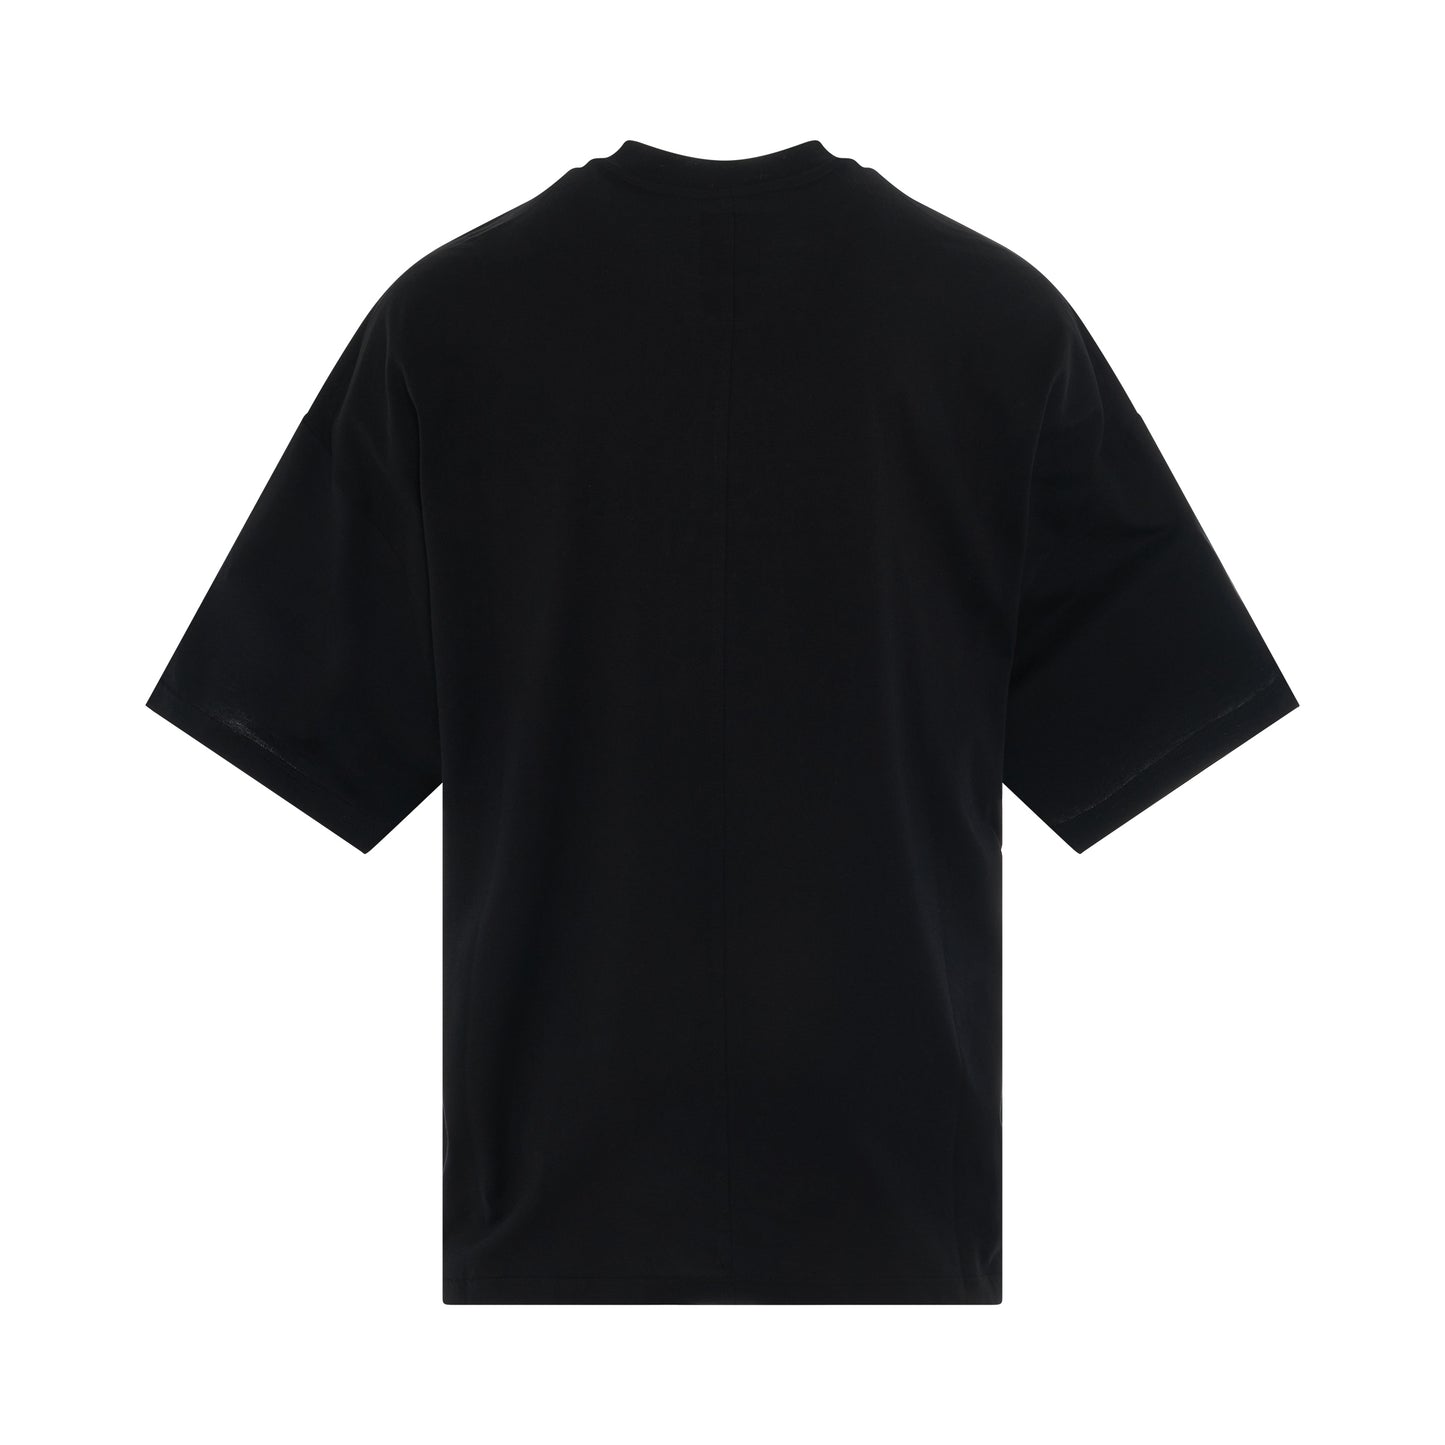 Rick Owens x Champion Tommy T-Shirt in Black